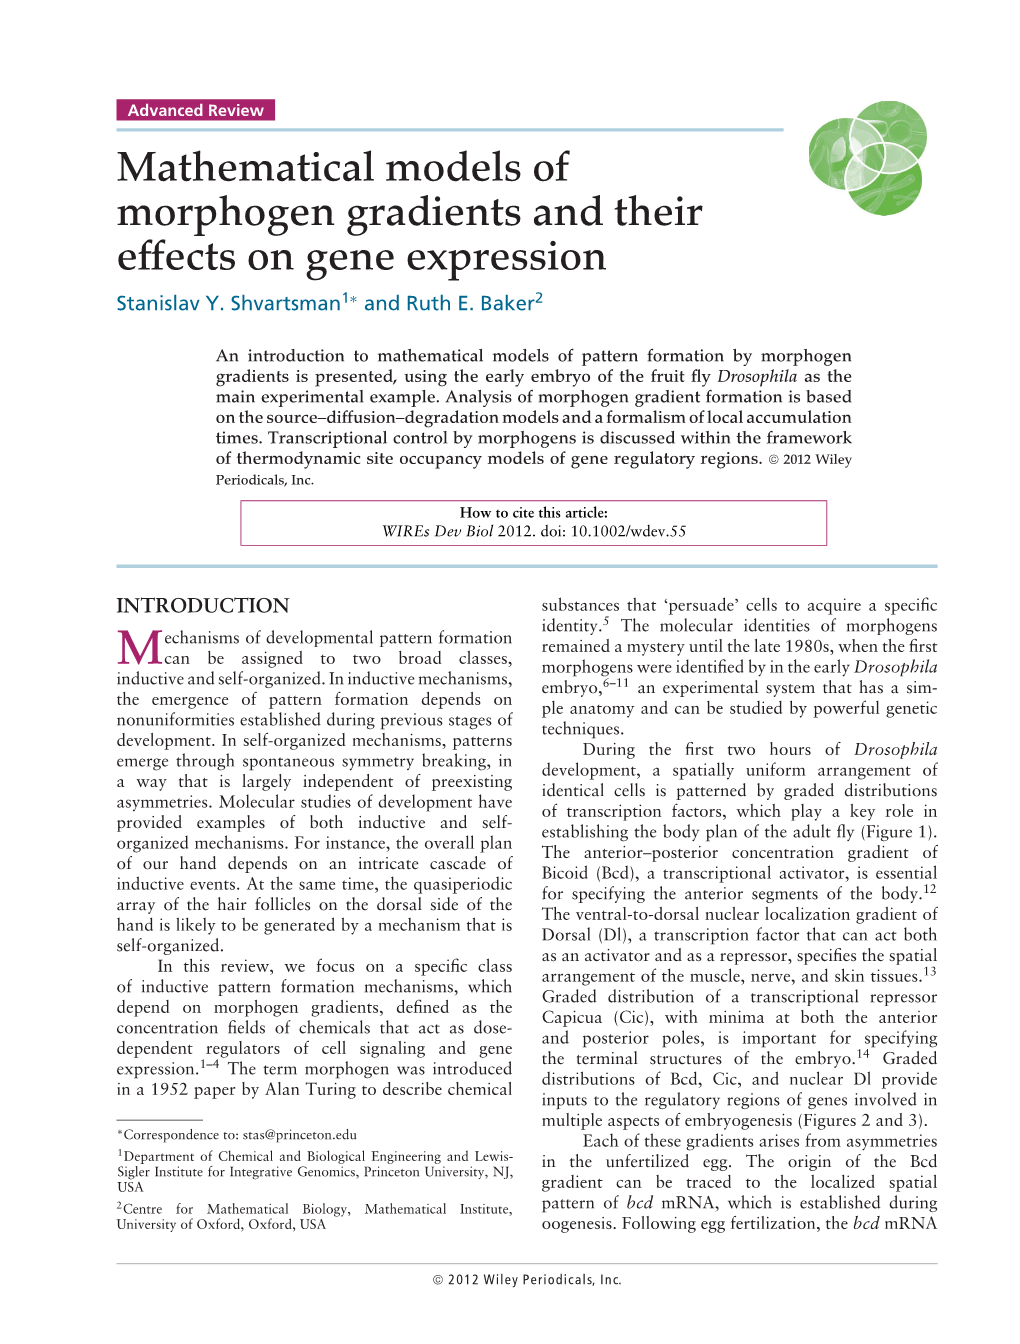 Mathematical Models of Morphogen Gradients and Their Effects on Gene Expression Stanislav Y